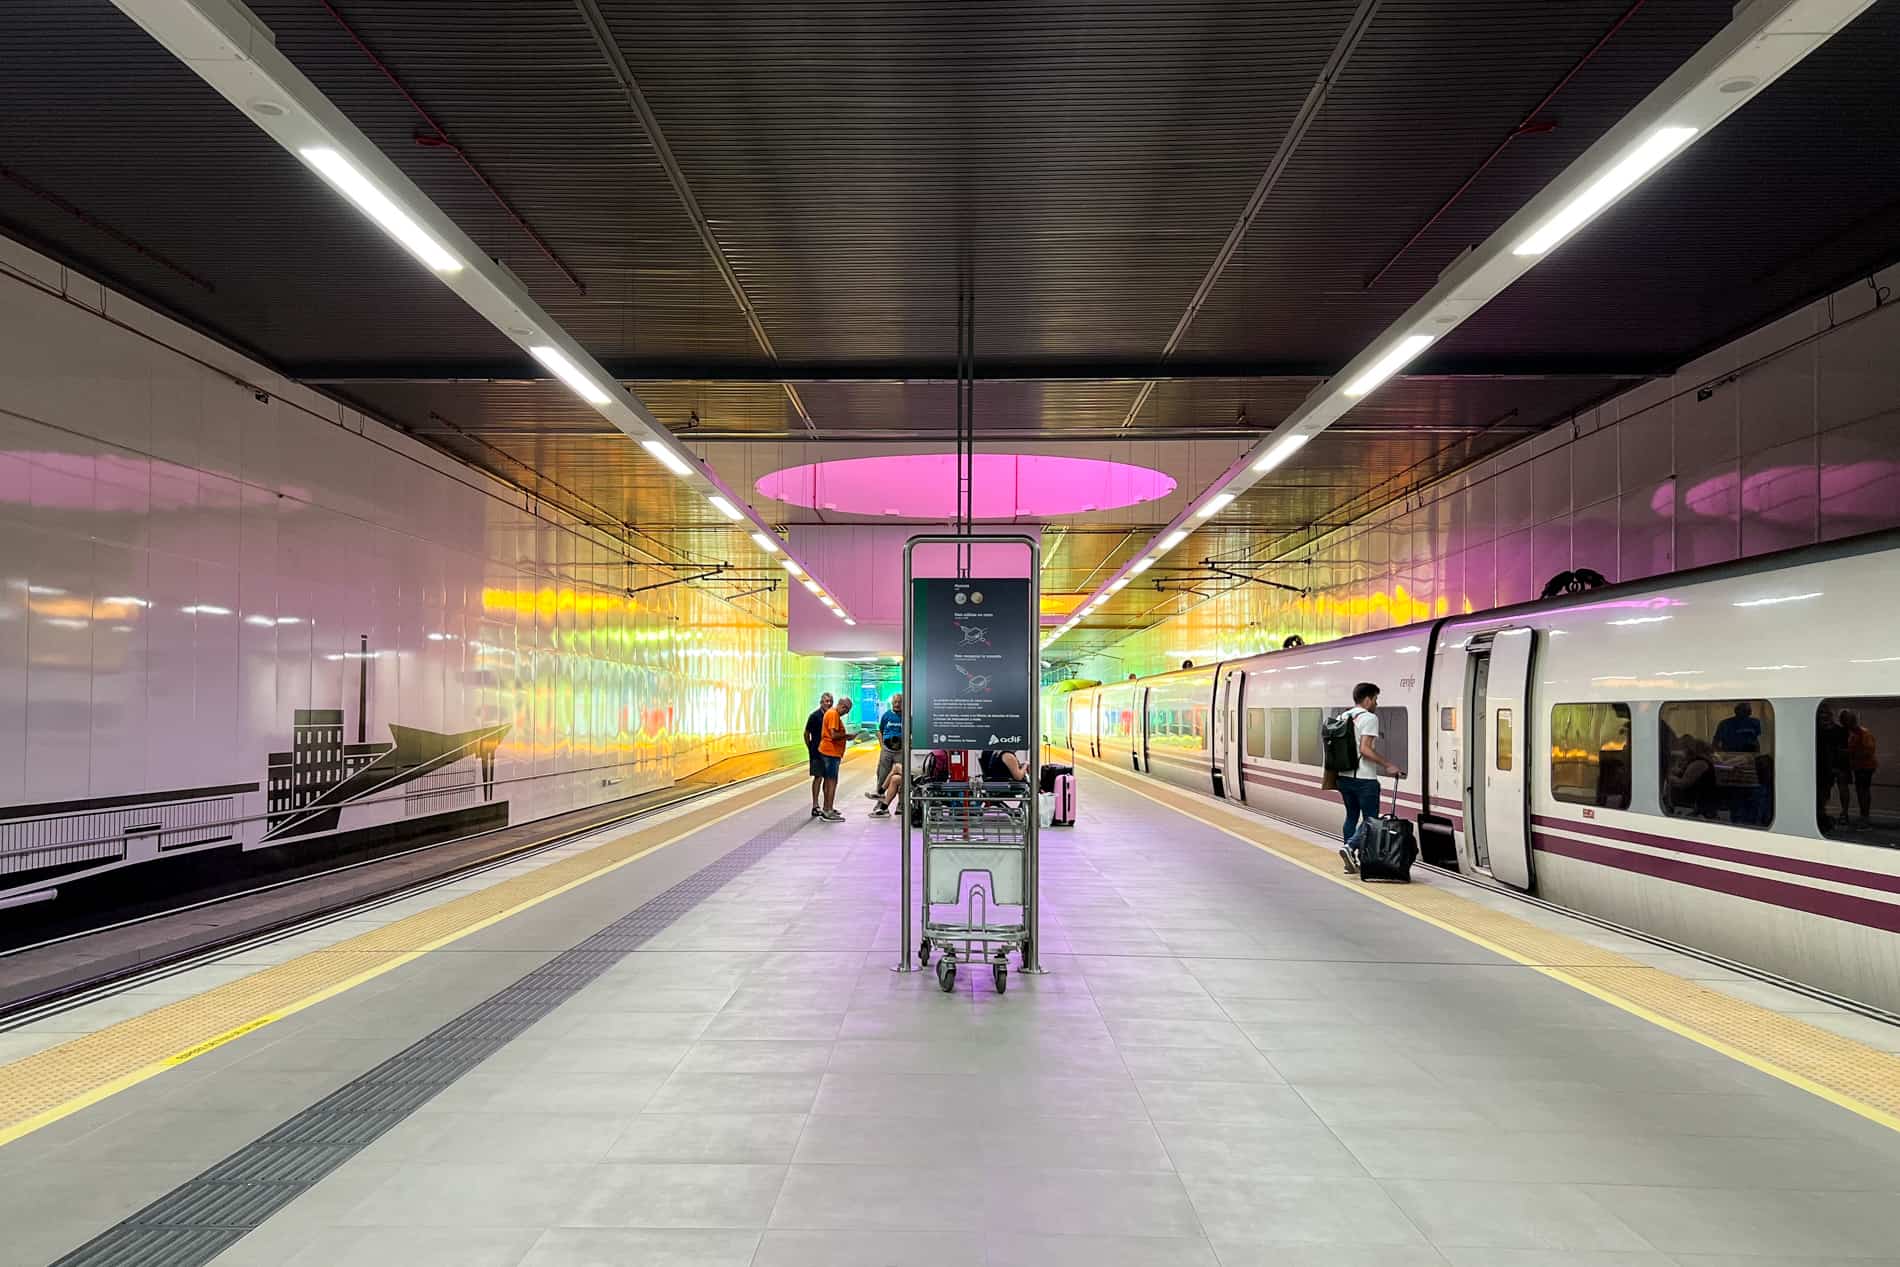 A Renfe train In Spain in León station, at a platform with a neon pink light. 